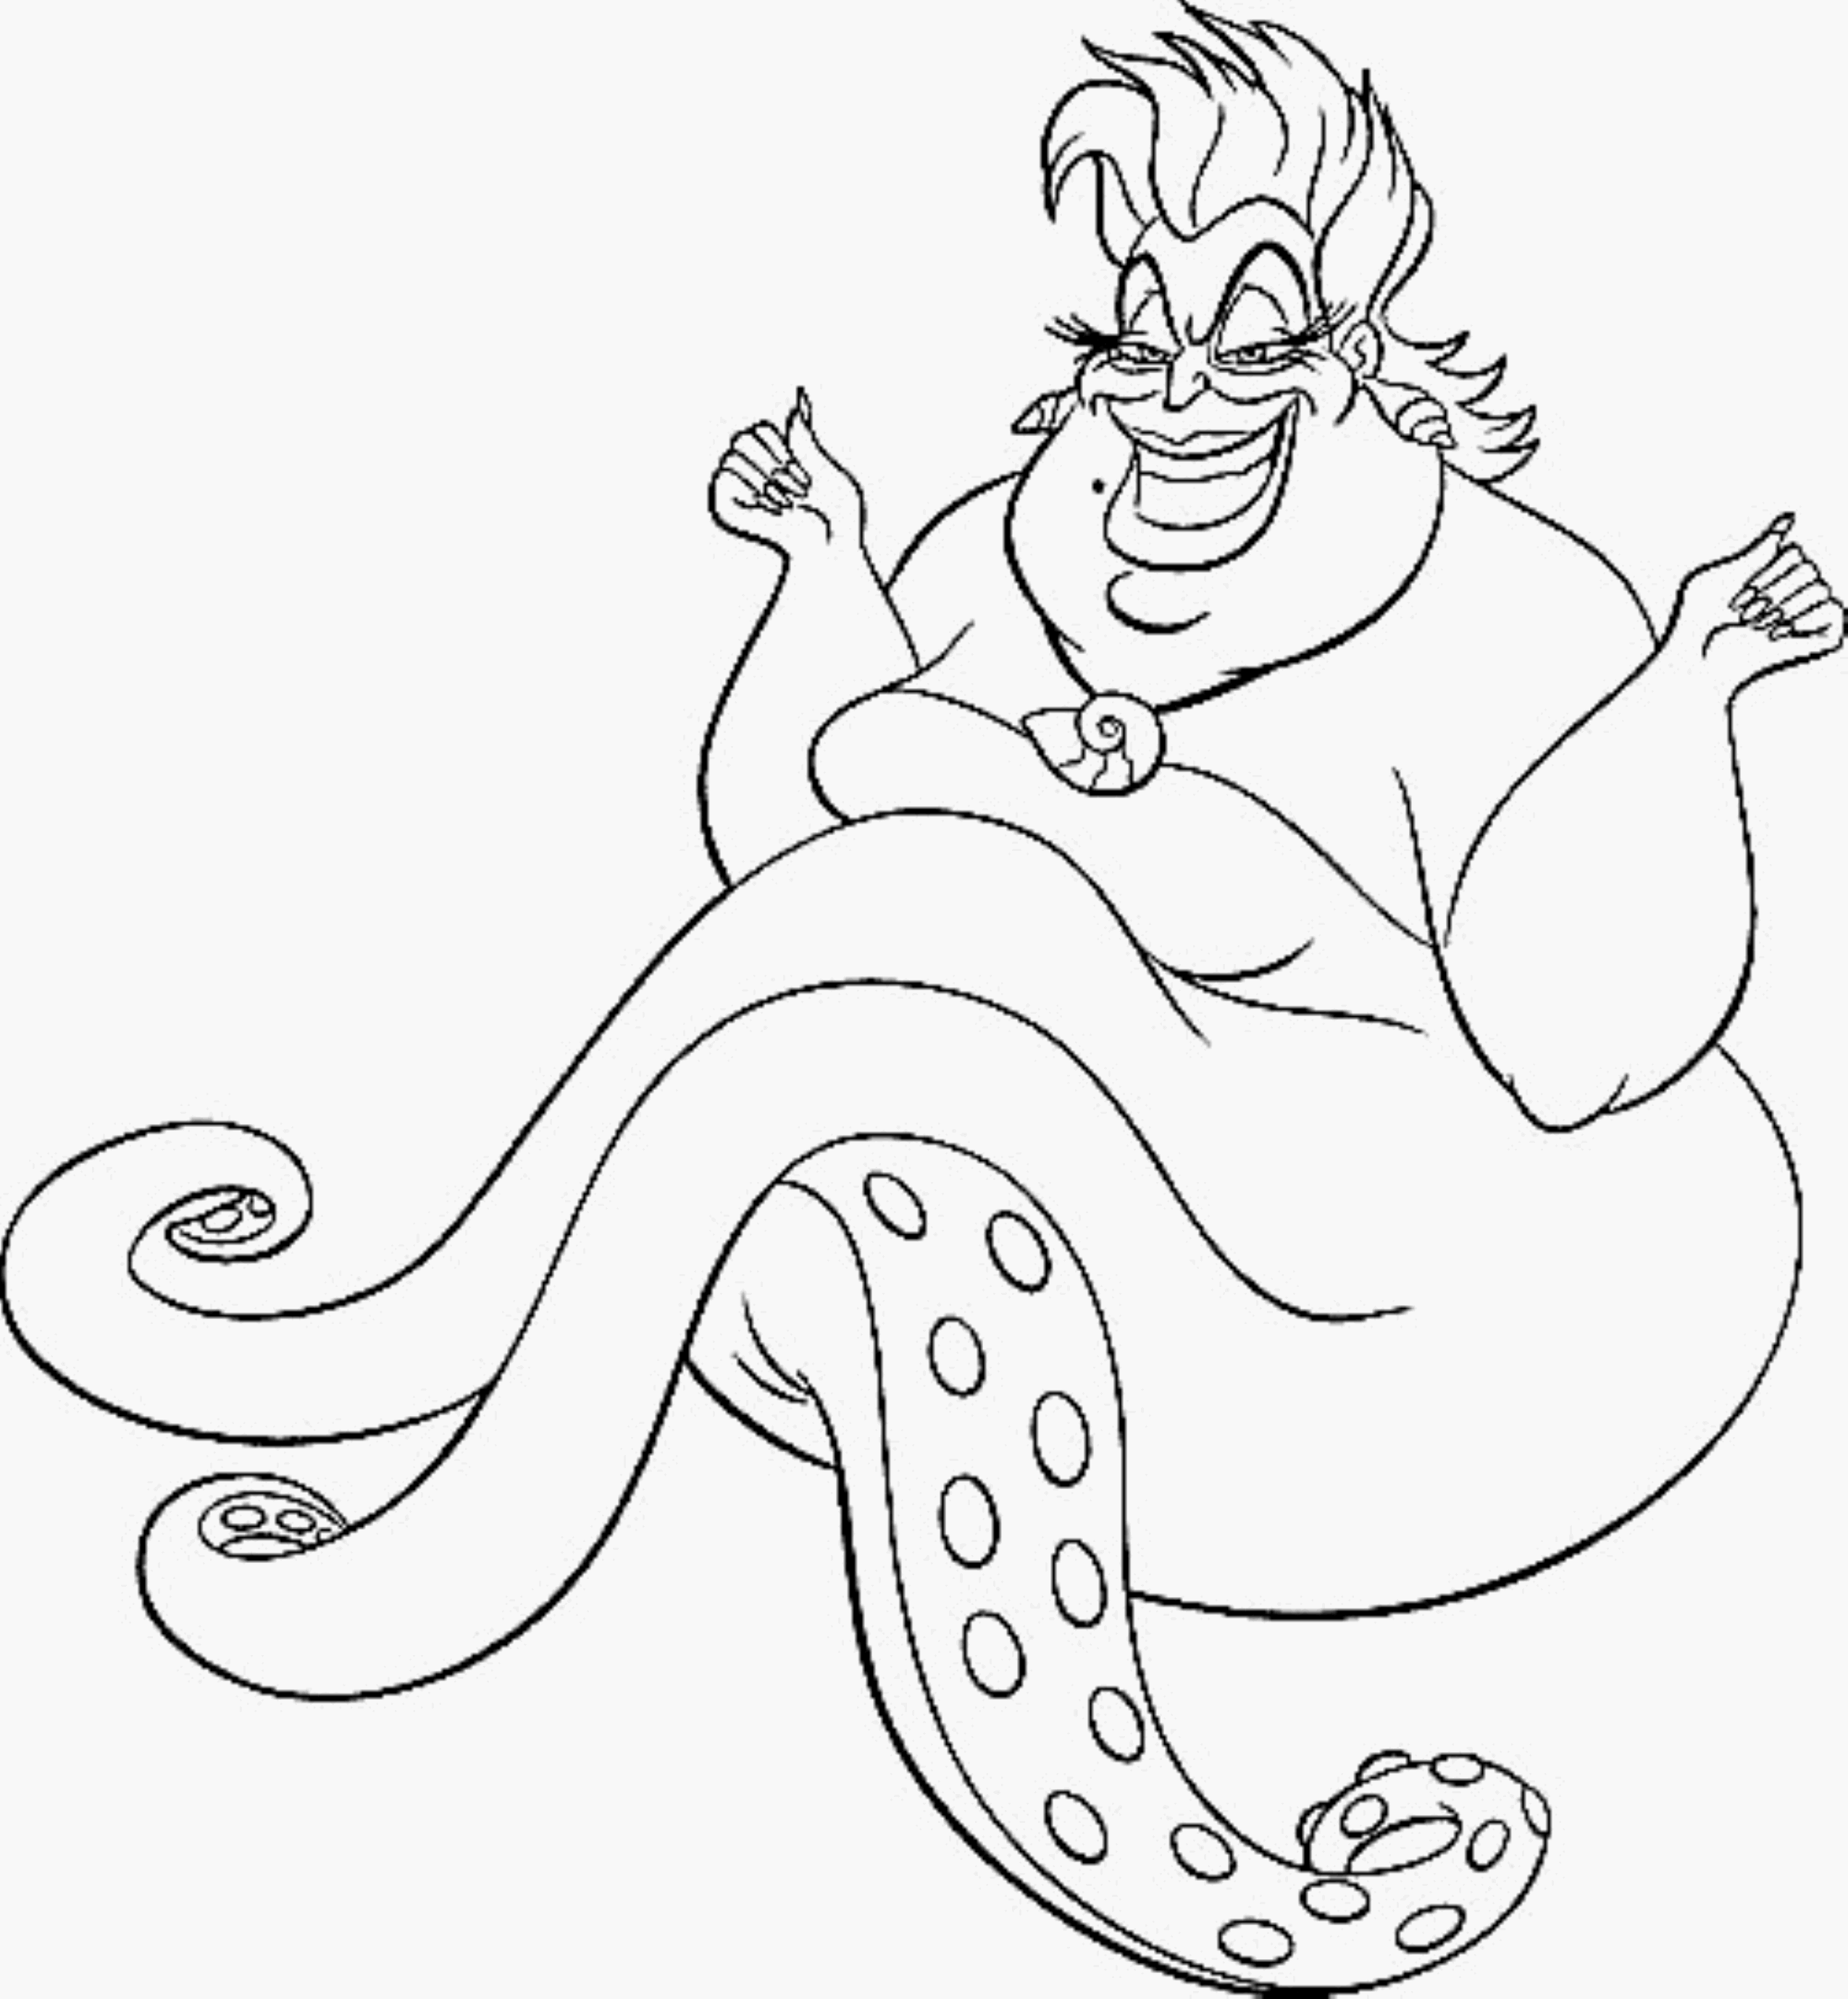 Ursula Little Mermaid Coloring Pages   Coloring Home